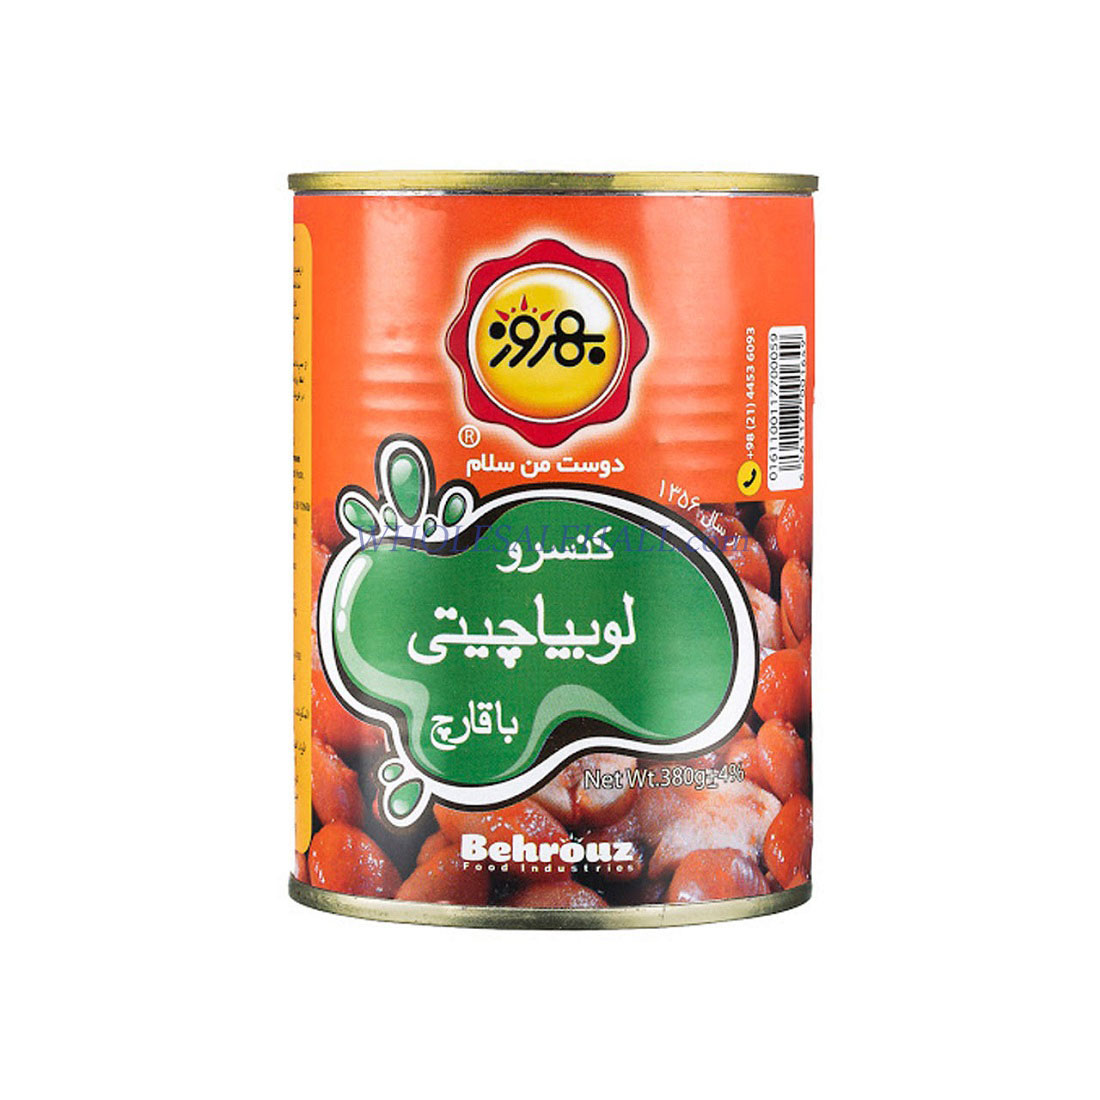 Canned Bean with 380 grams of Behrouz